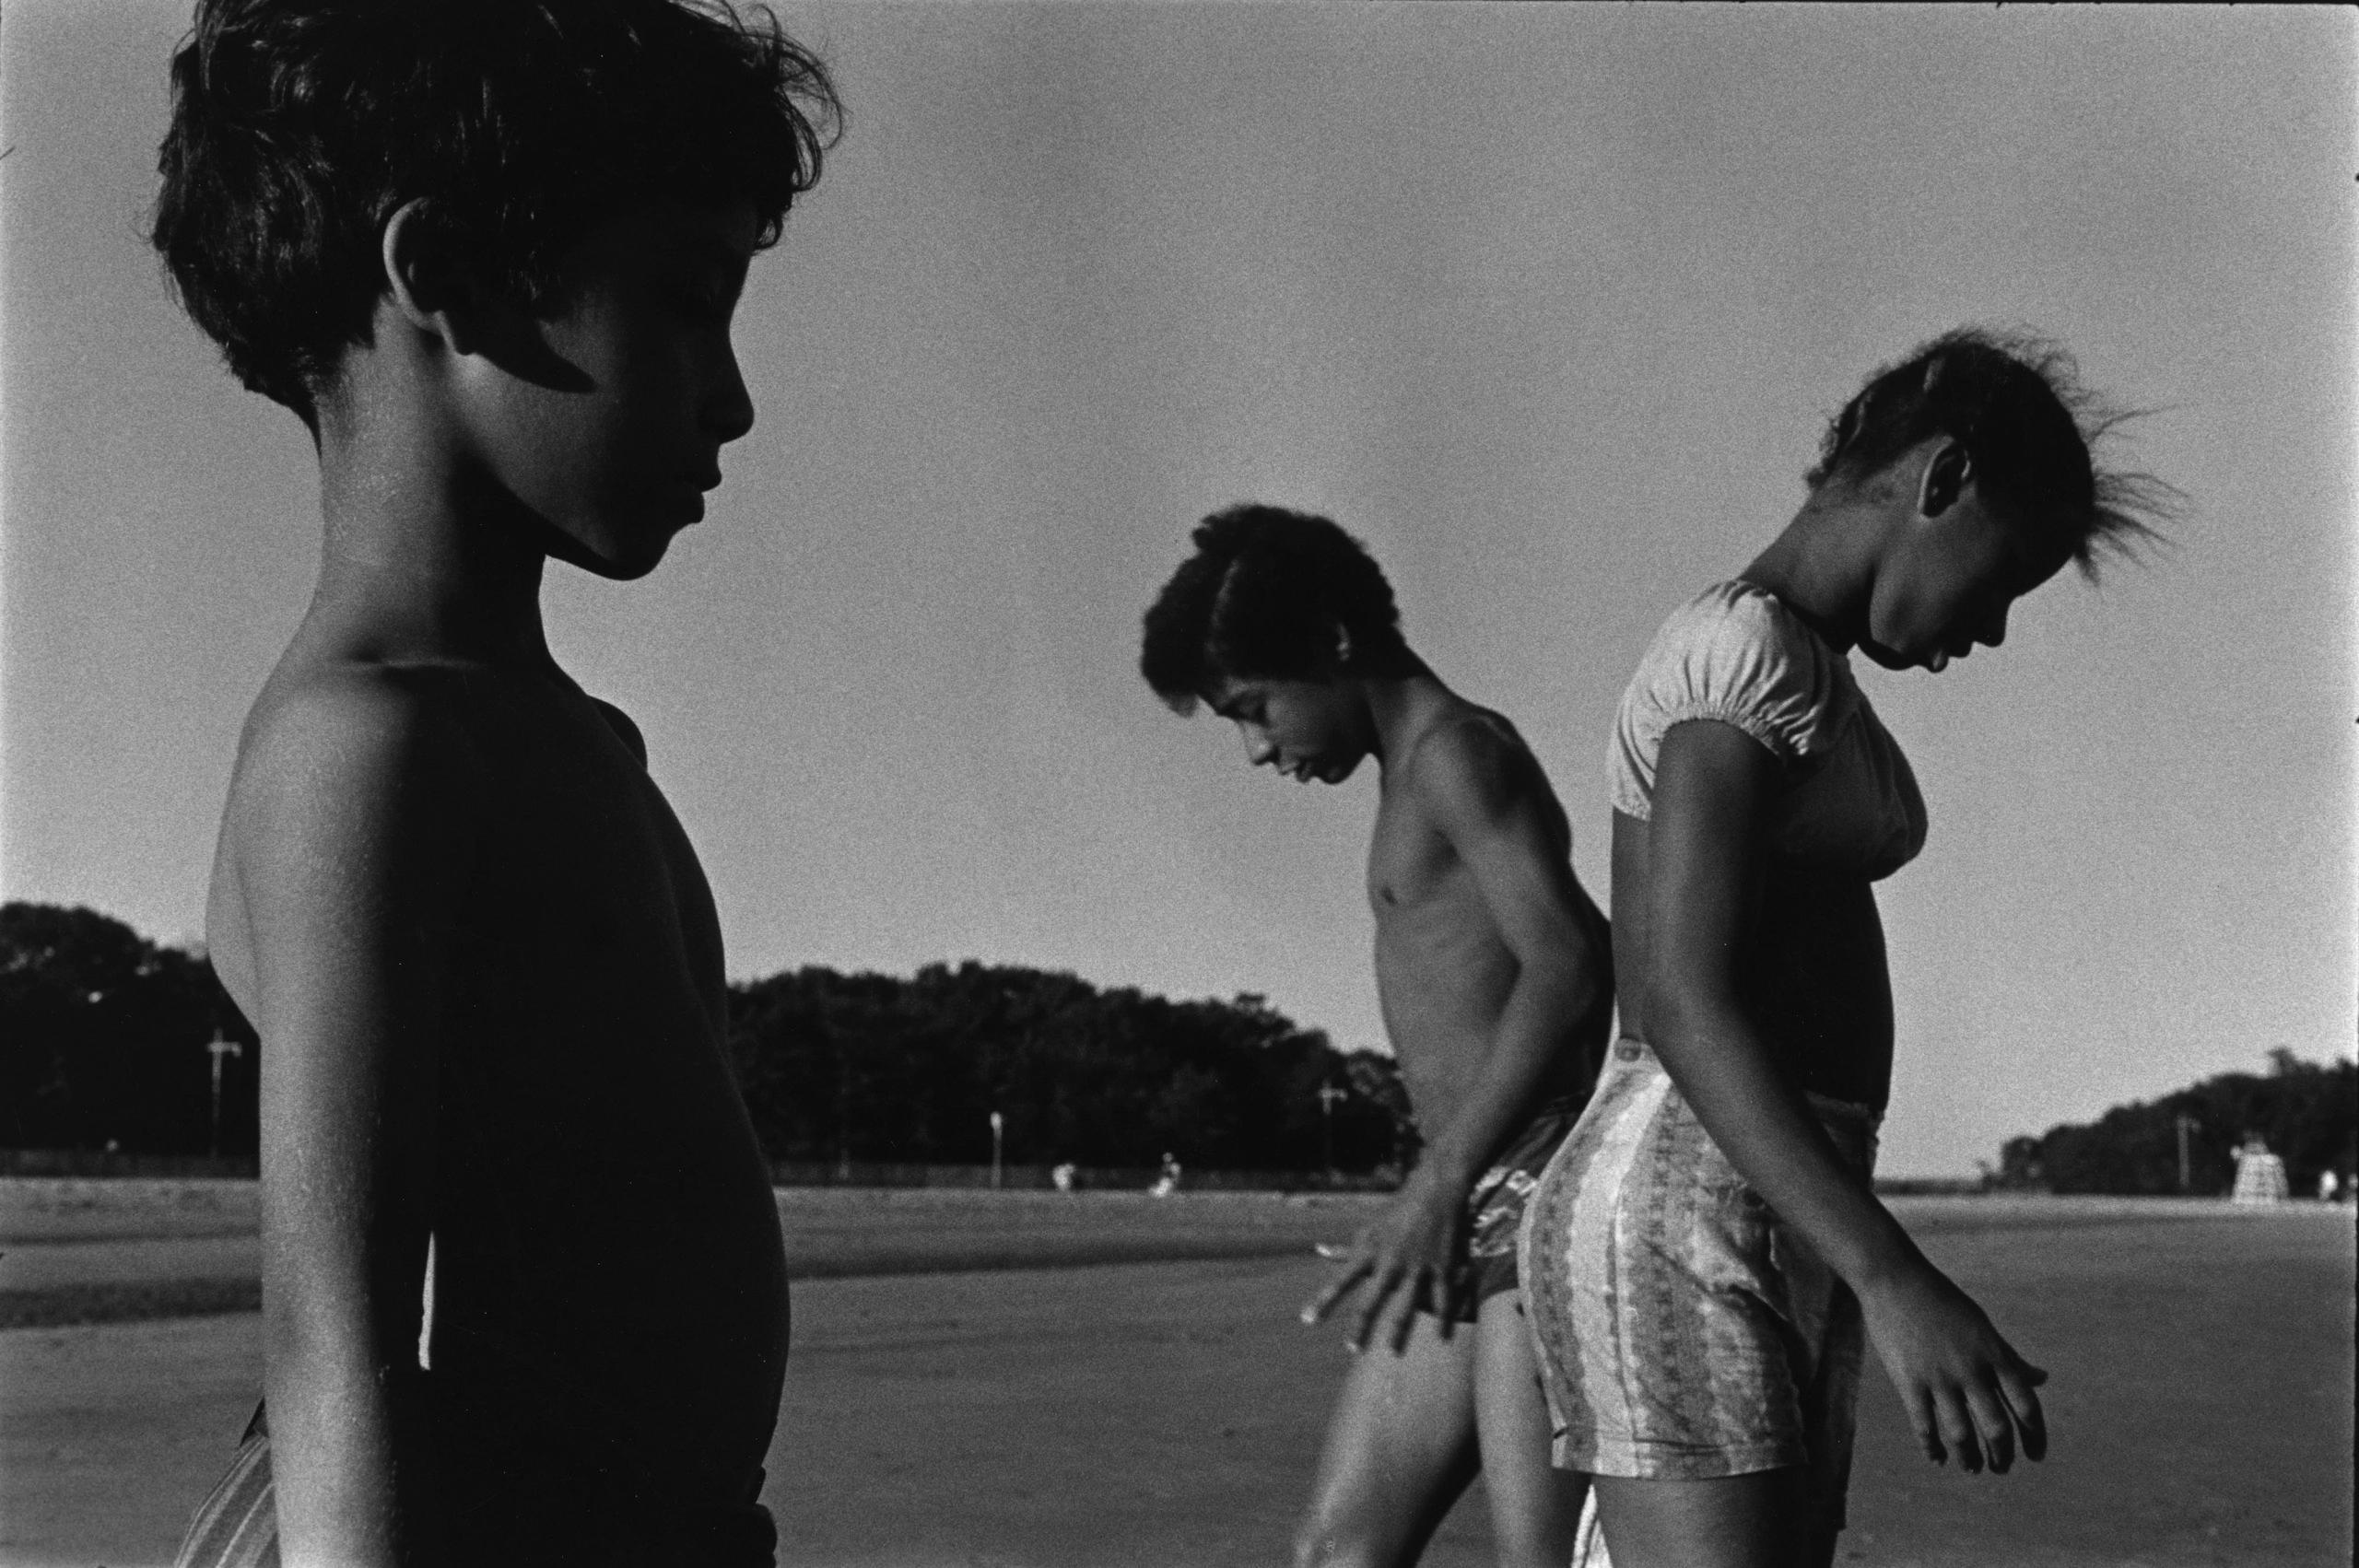 Louis Stettner Black and White Photograph - After Labor Day, Orchard Beach, Bronx, New York